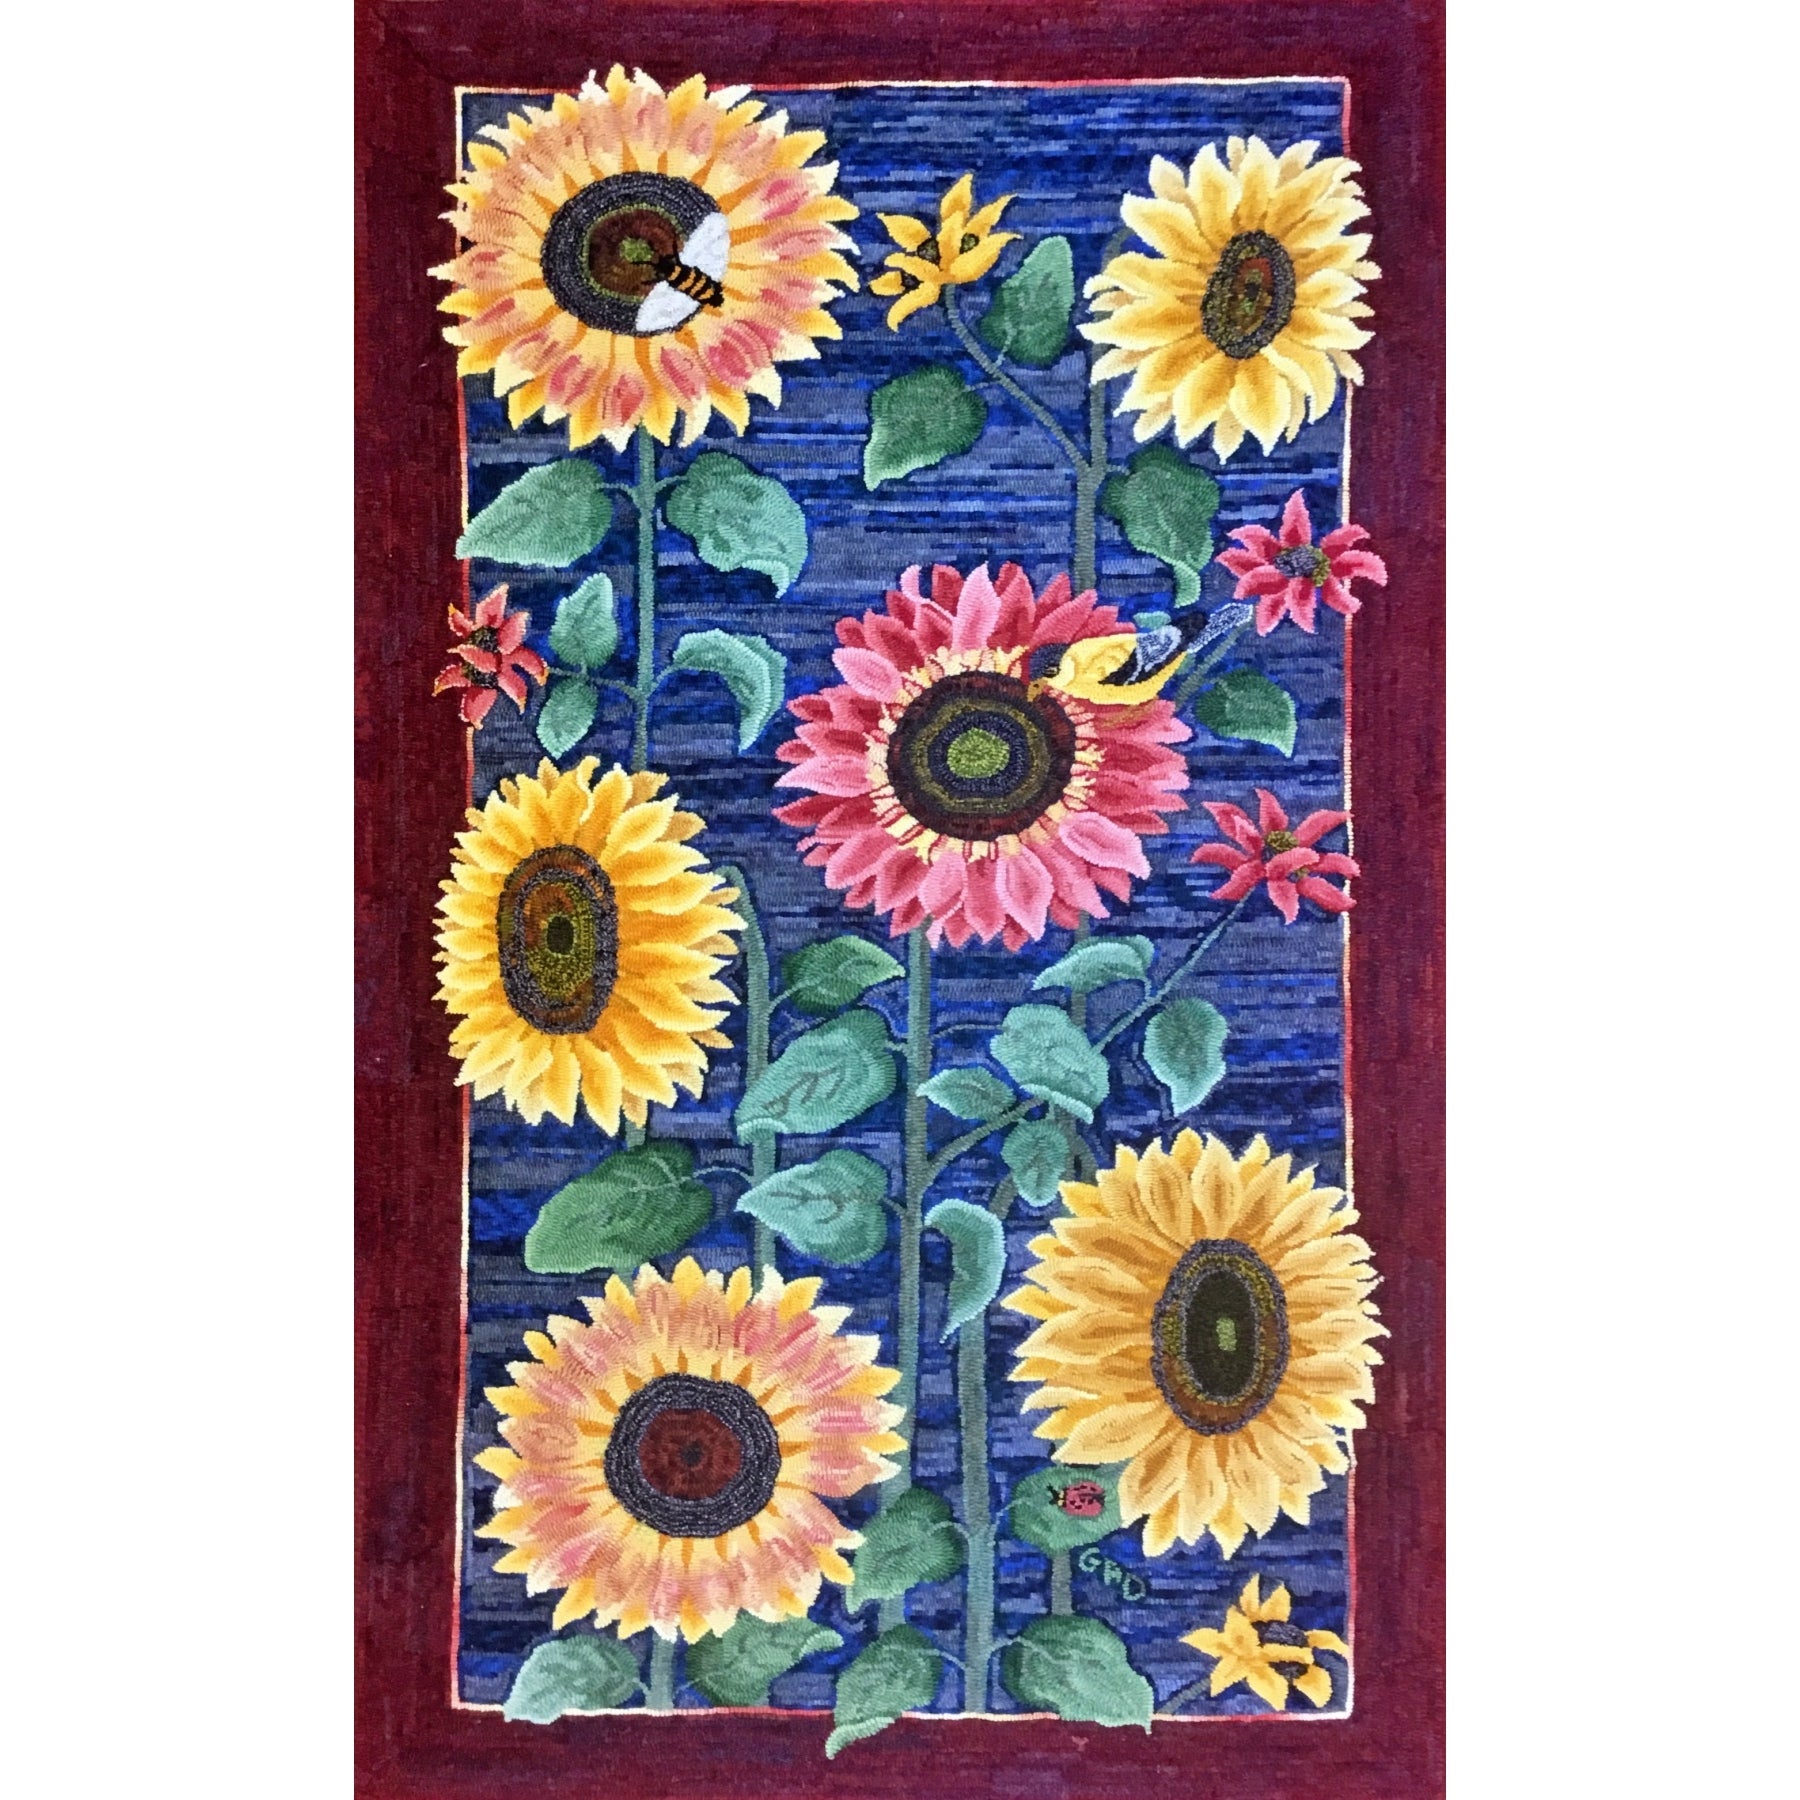 Sunflowers, rug hooked by Gail Dufresne